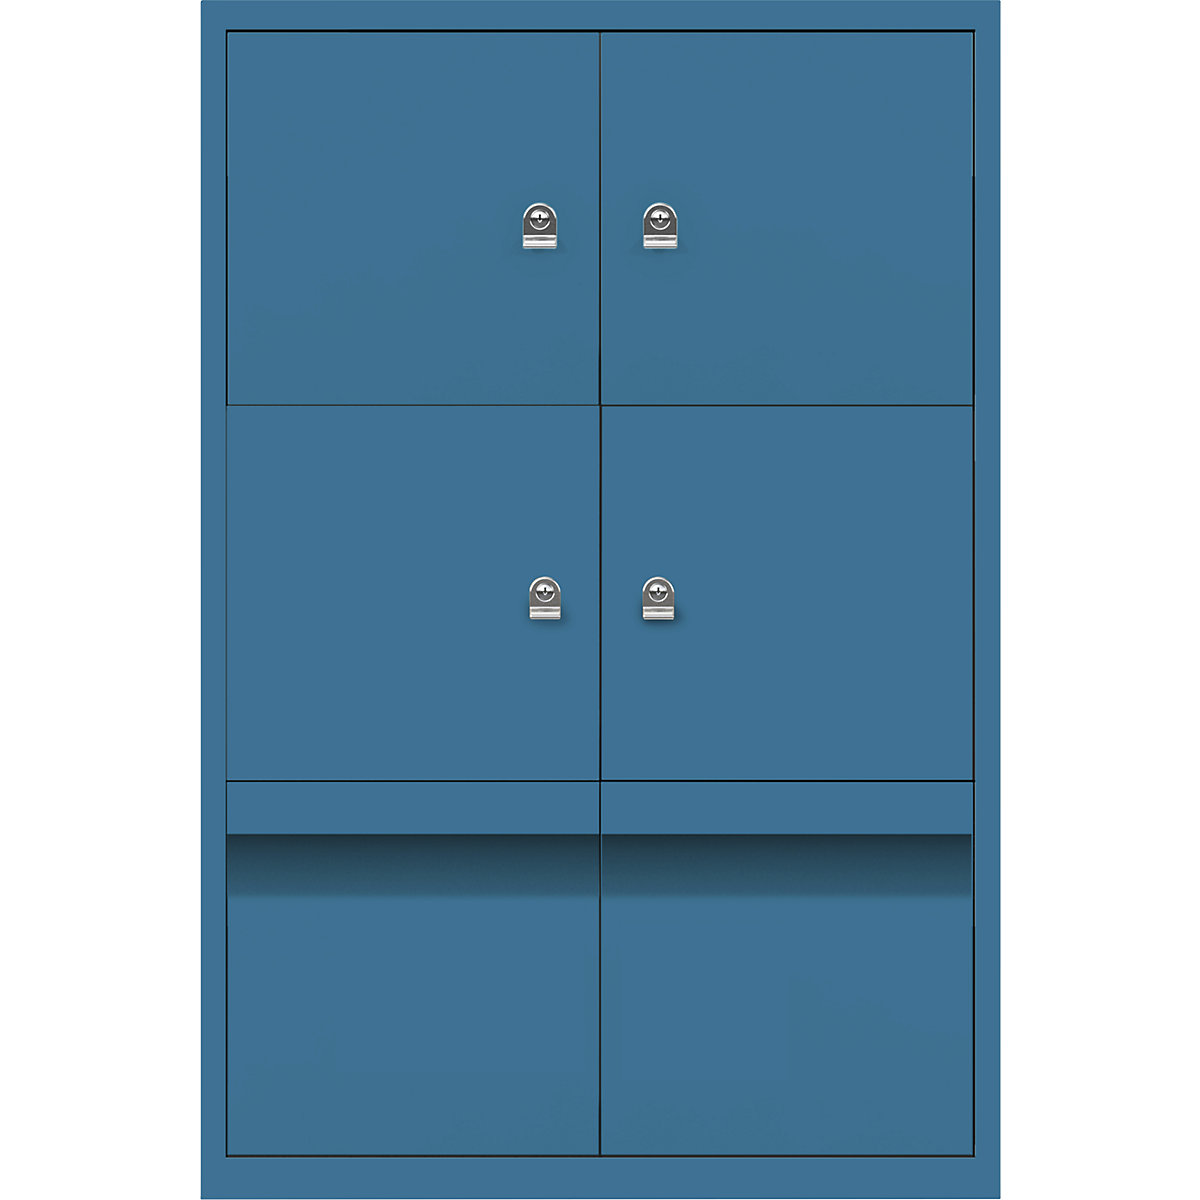 LateralFile™ lodge – BISLEY, with 4 lockable compartments and 2 drawers, height 375 mm each, azure-7